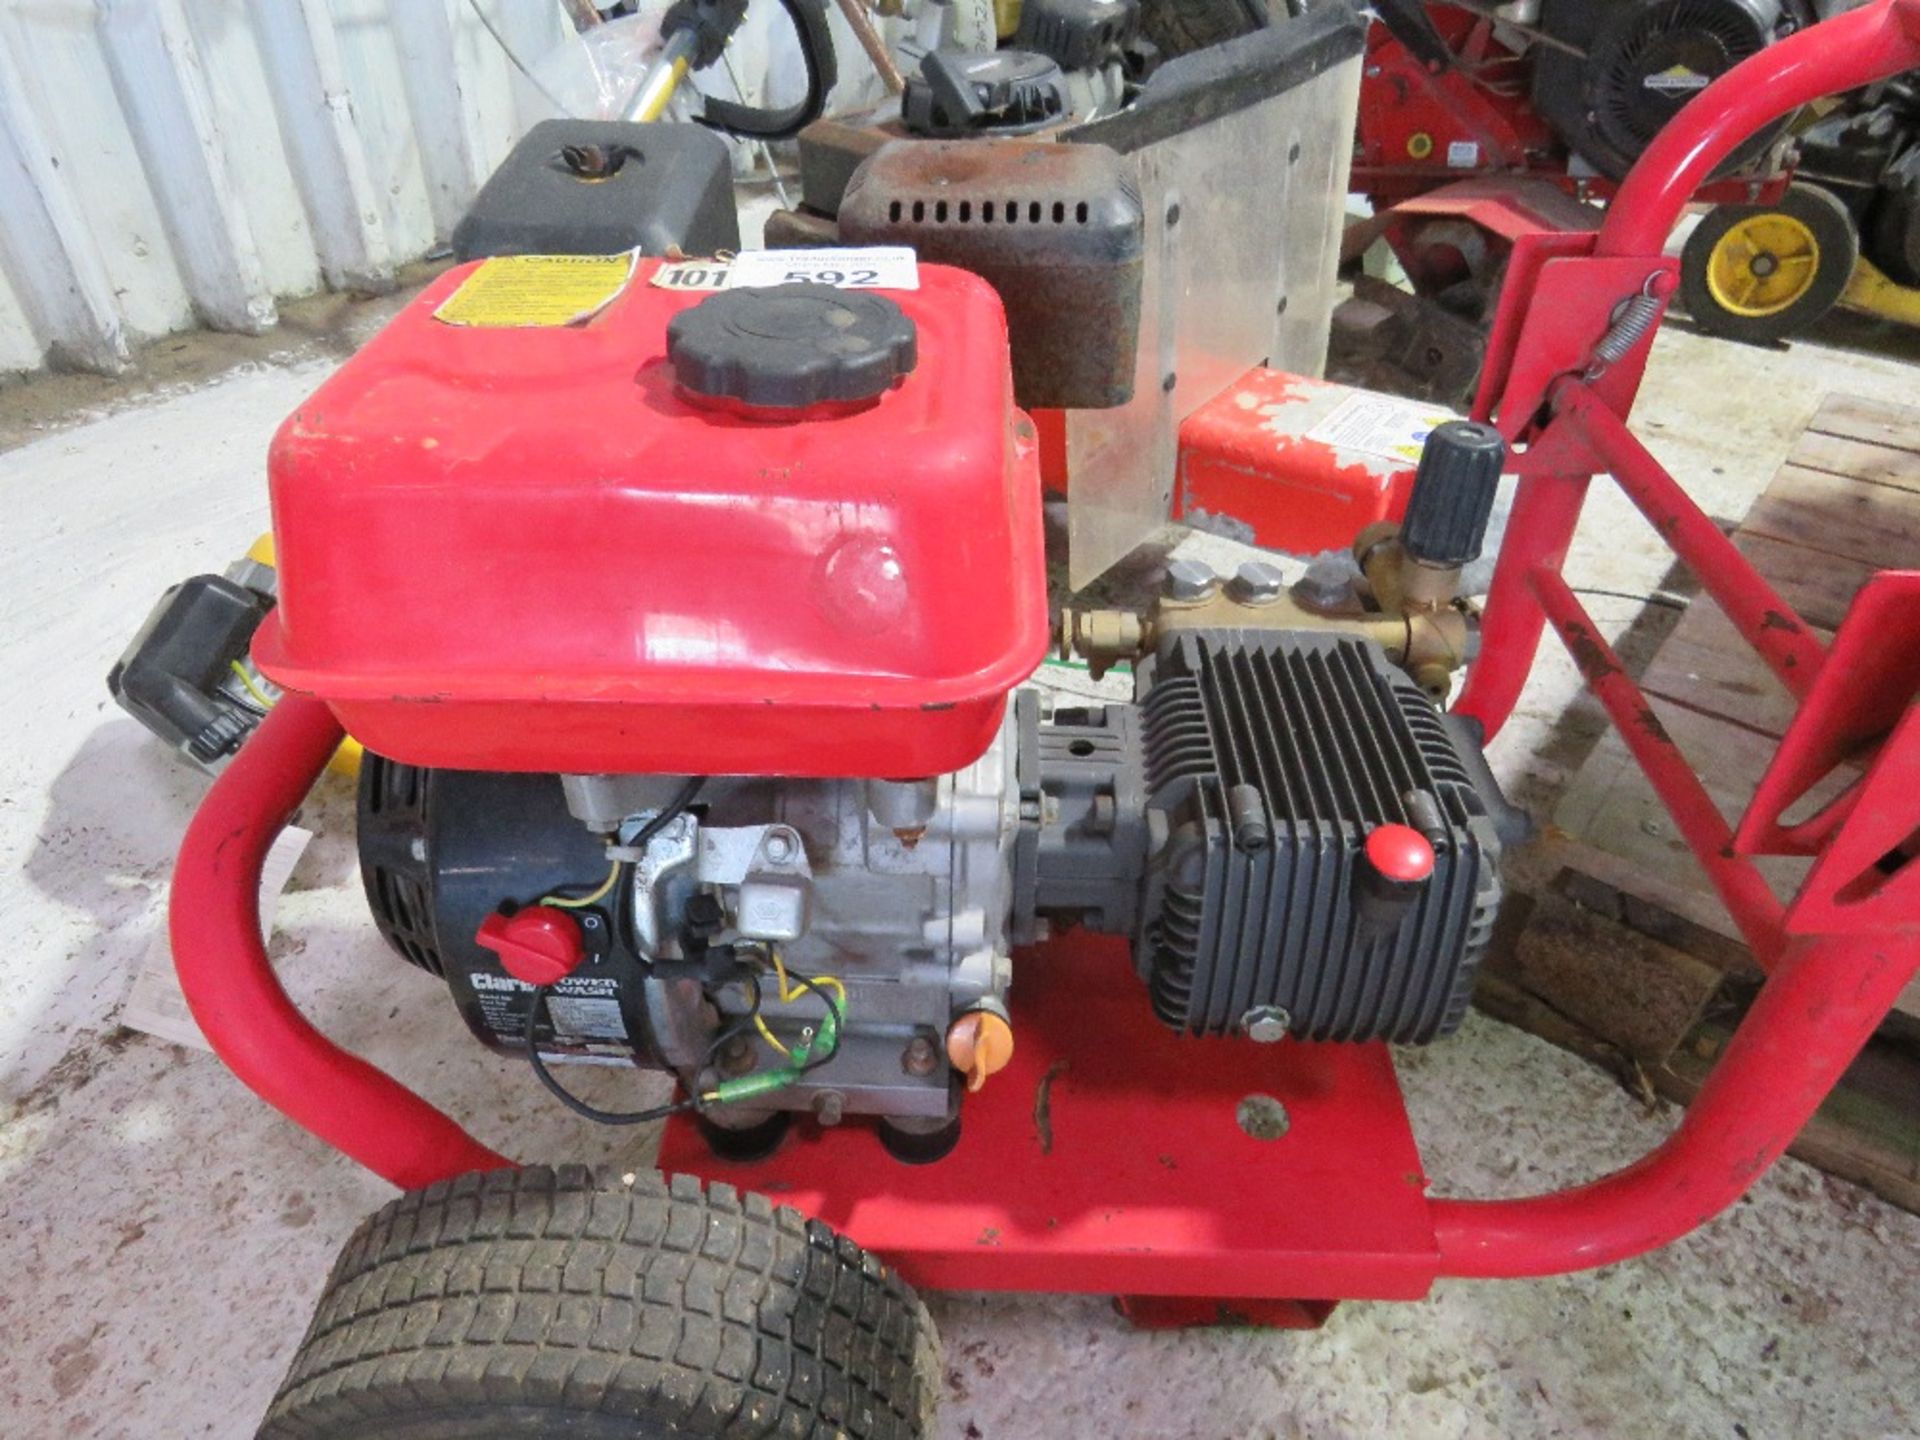 PETROL ENGINED POWER WASHER, NO HOSE OR LANCE.....THIS LOT IS SOLD UNDER THE AUCTIONEERS MARGIN SCHE - Image 2 of 4